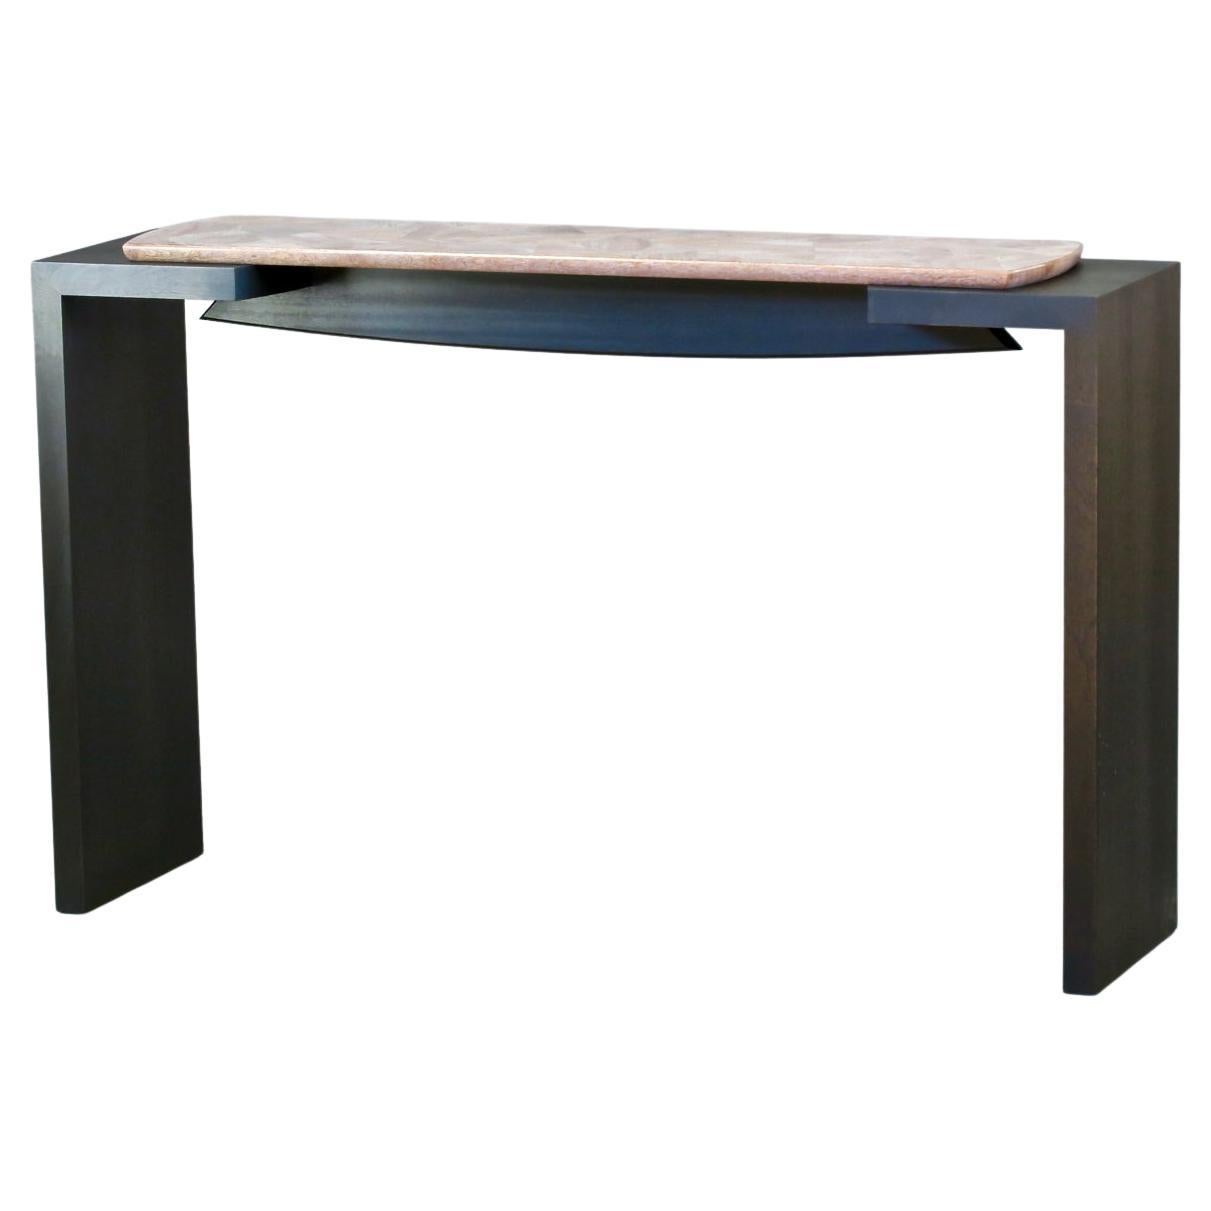 Cracked Ice Mahogany Console by Thomas Throop/ Black Creek Design- Made to Order